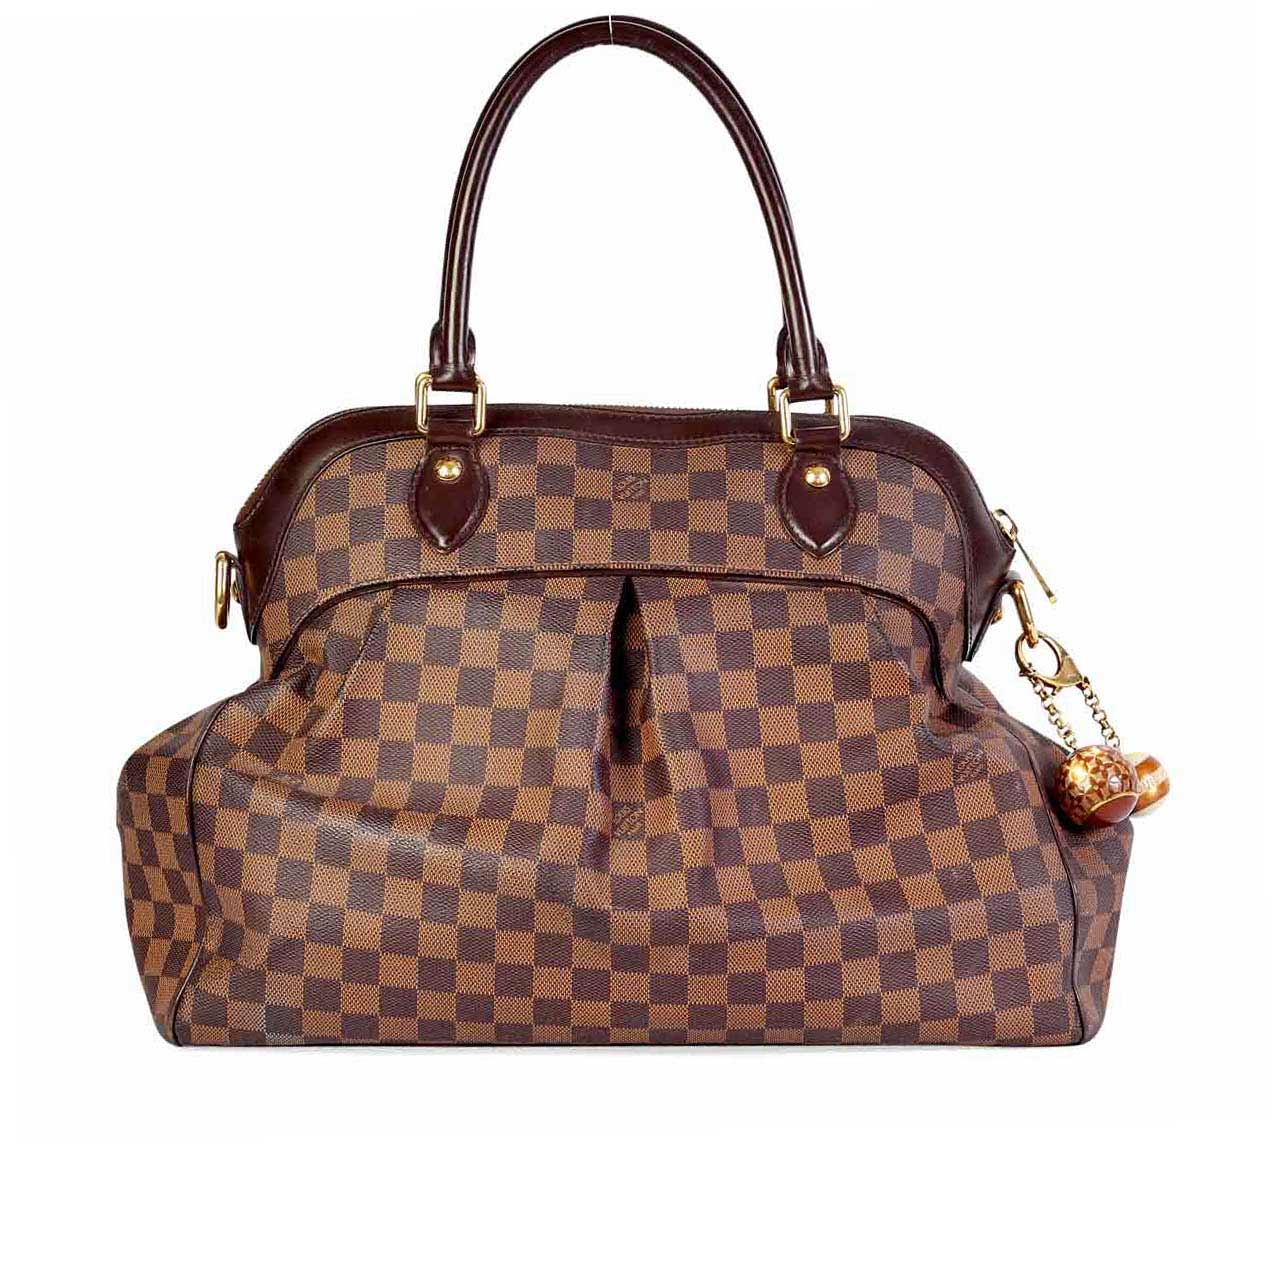 How To Say Louis Vuitton Damier | Confederated Tribes of the Umatilla Indian Reservation